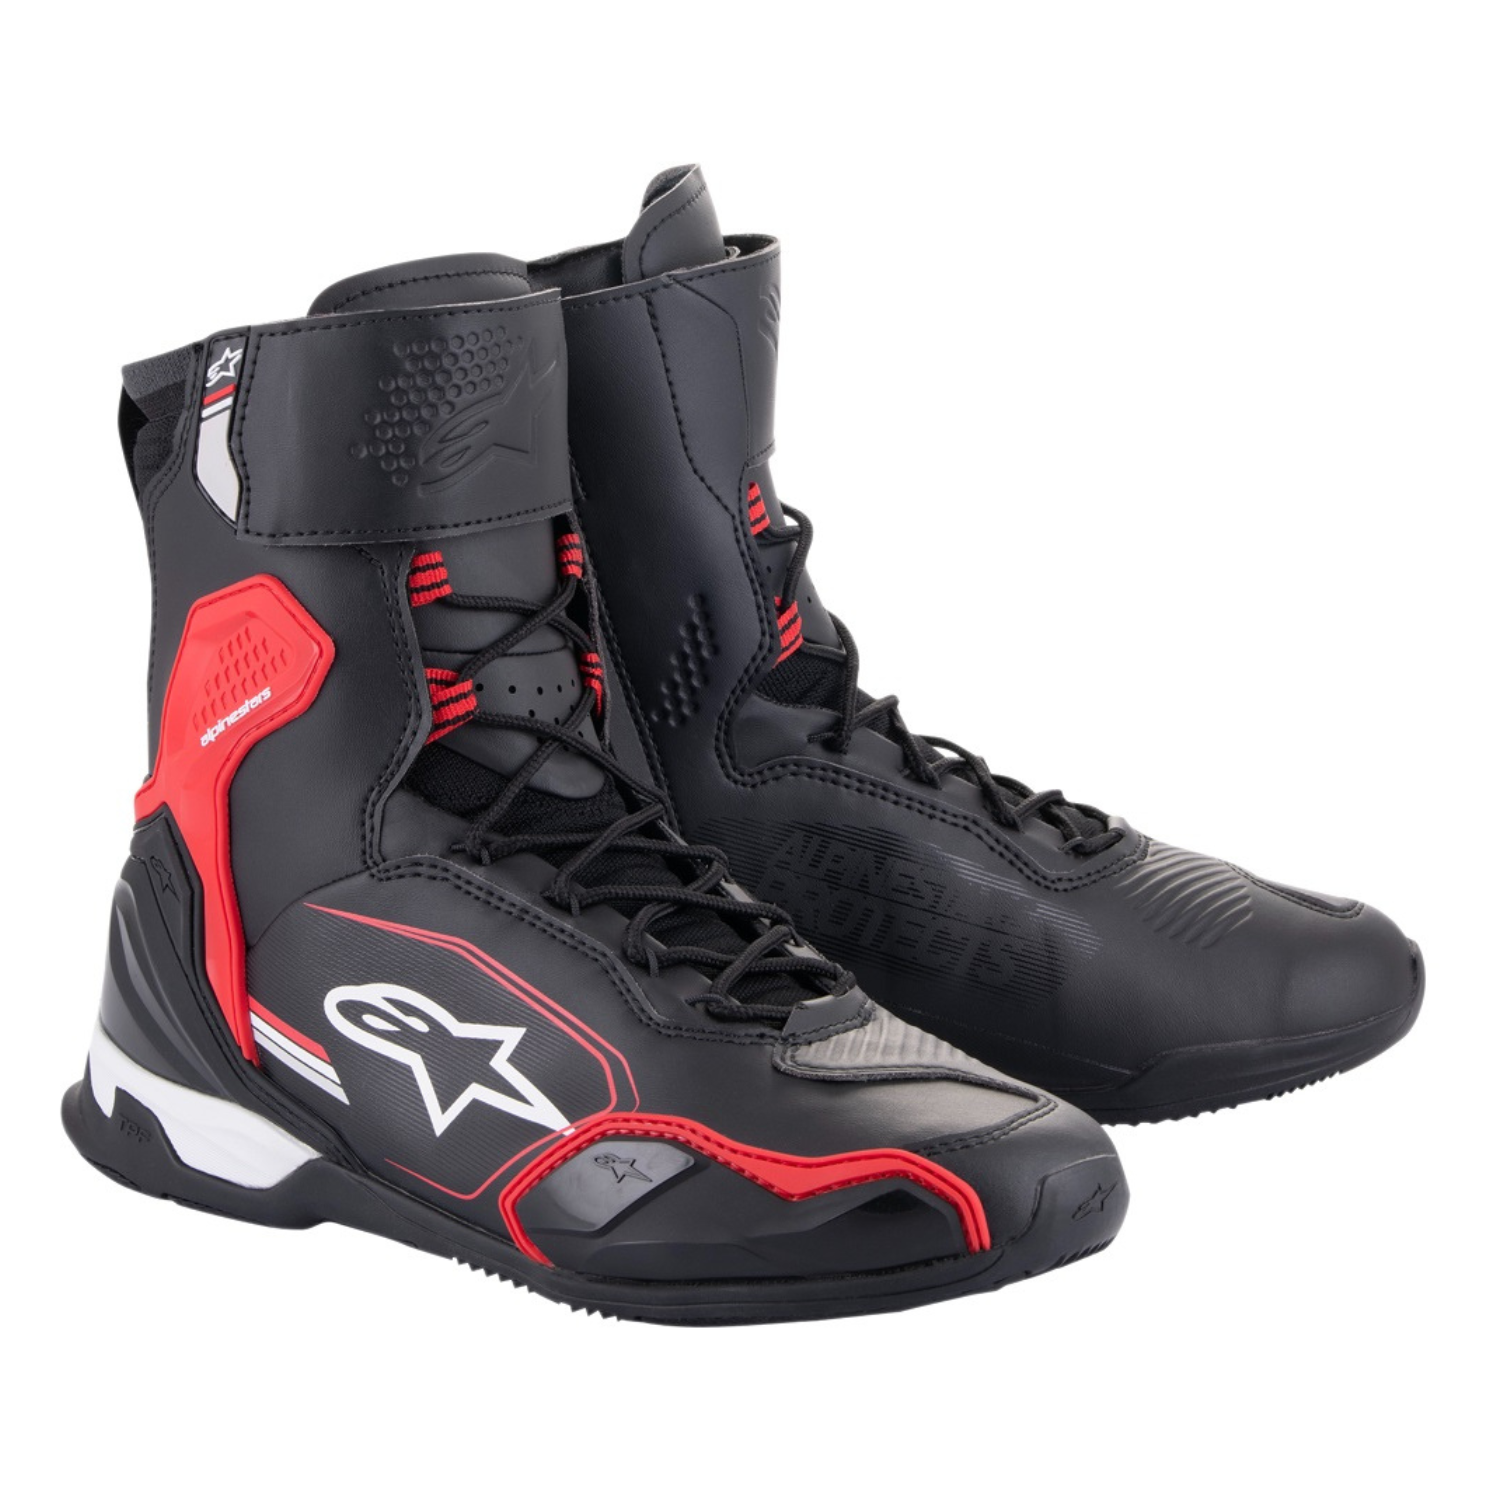 Image of Alpinestars Superfaster Shoes Black Bright Red White Talla US 13